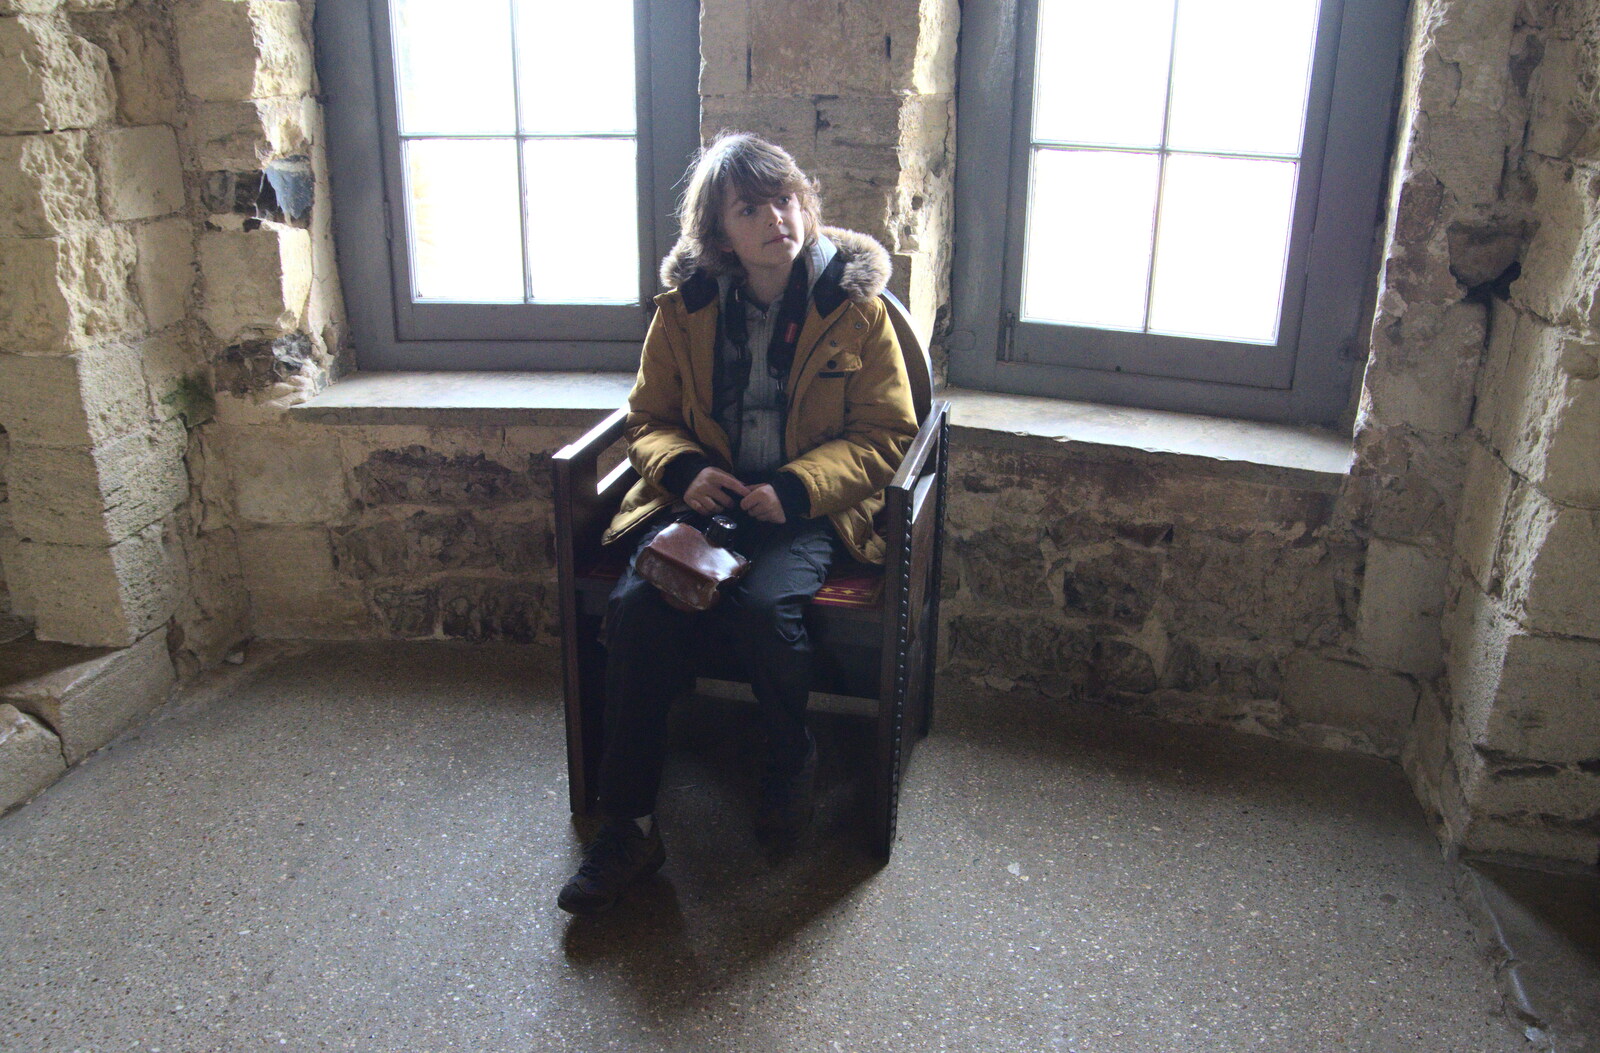 A Trip to Orford, Suffolk - 25th January 2020: Fred sits in a throne-like chair